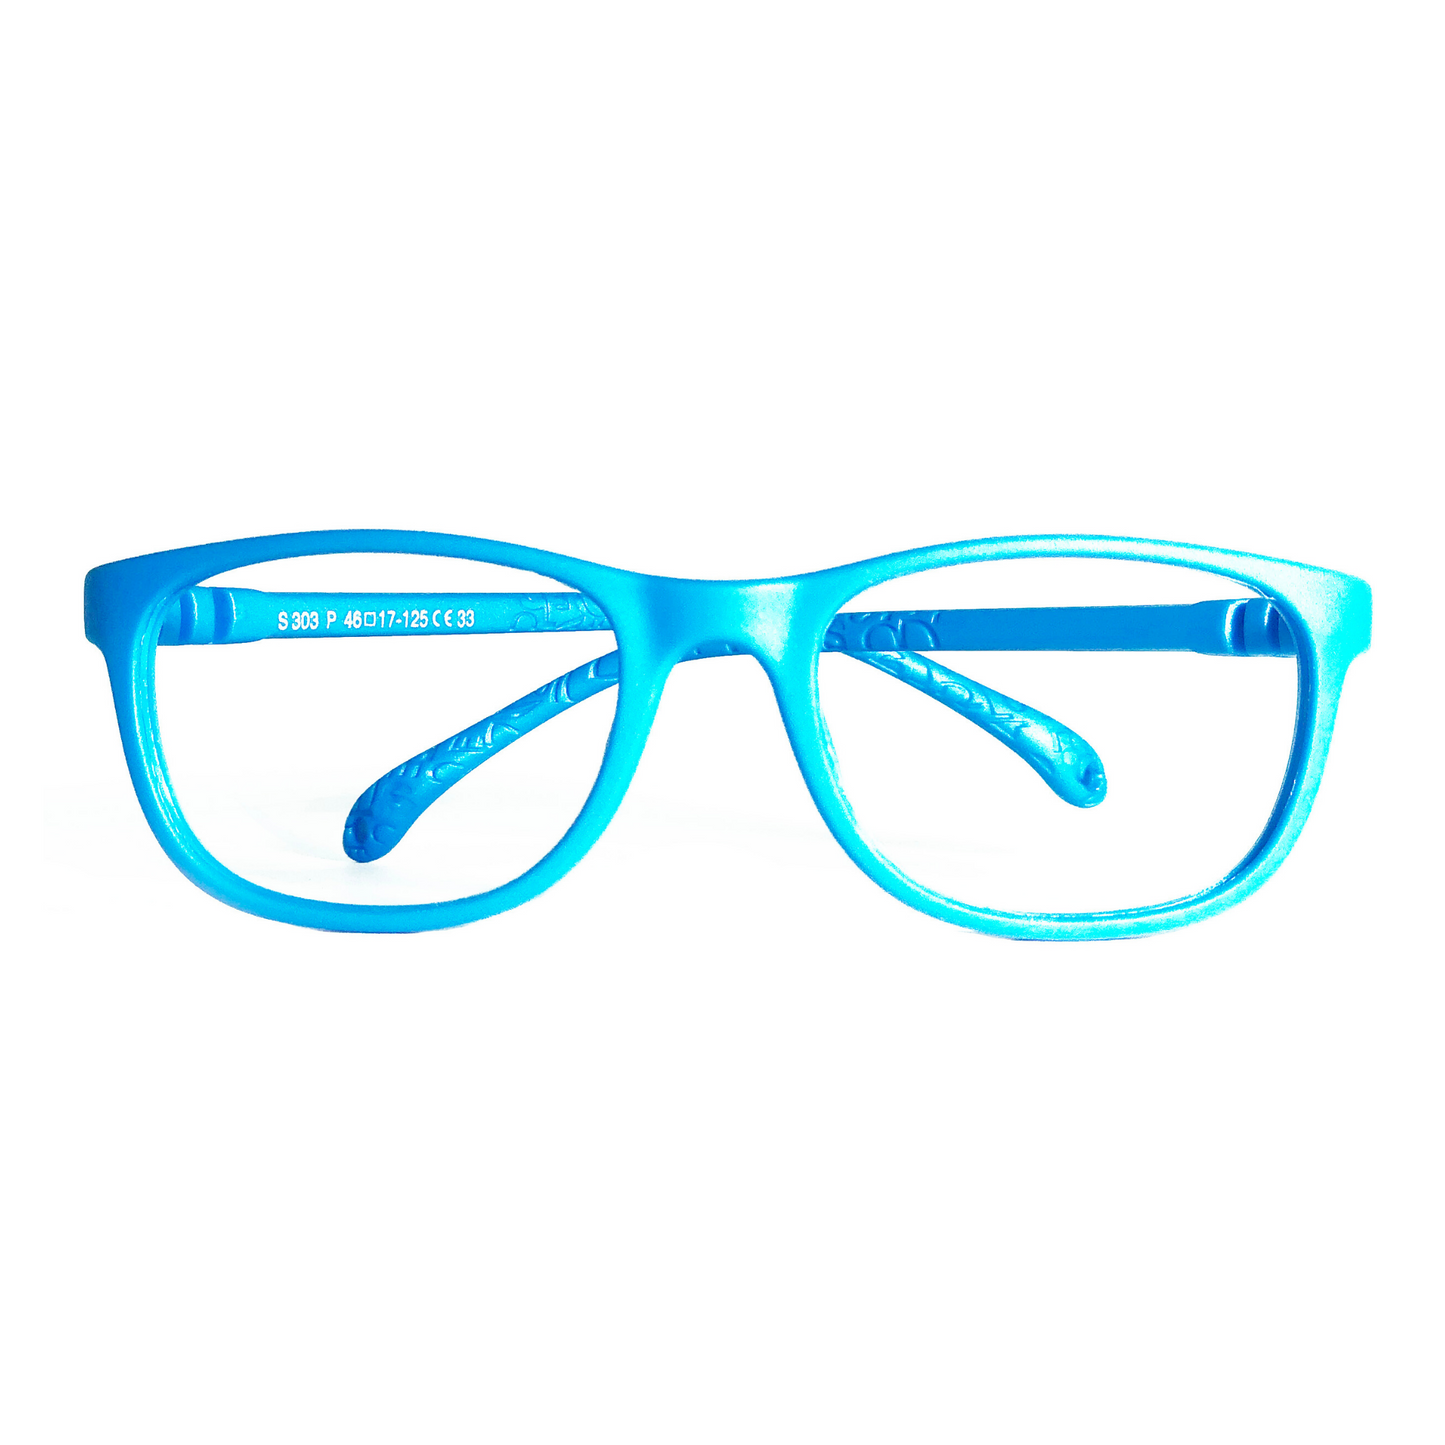 DLR for Kids S303 (Small Size Eyewear)